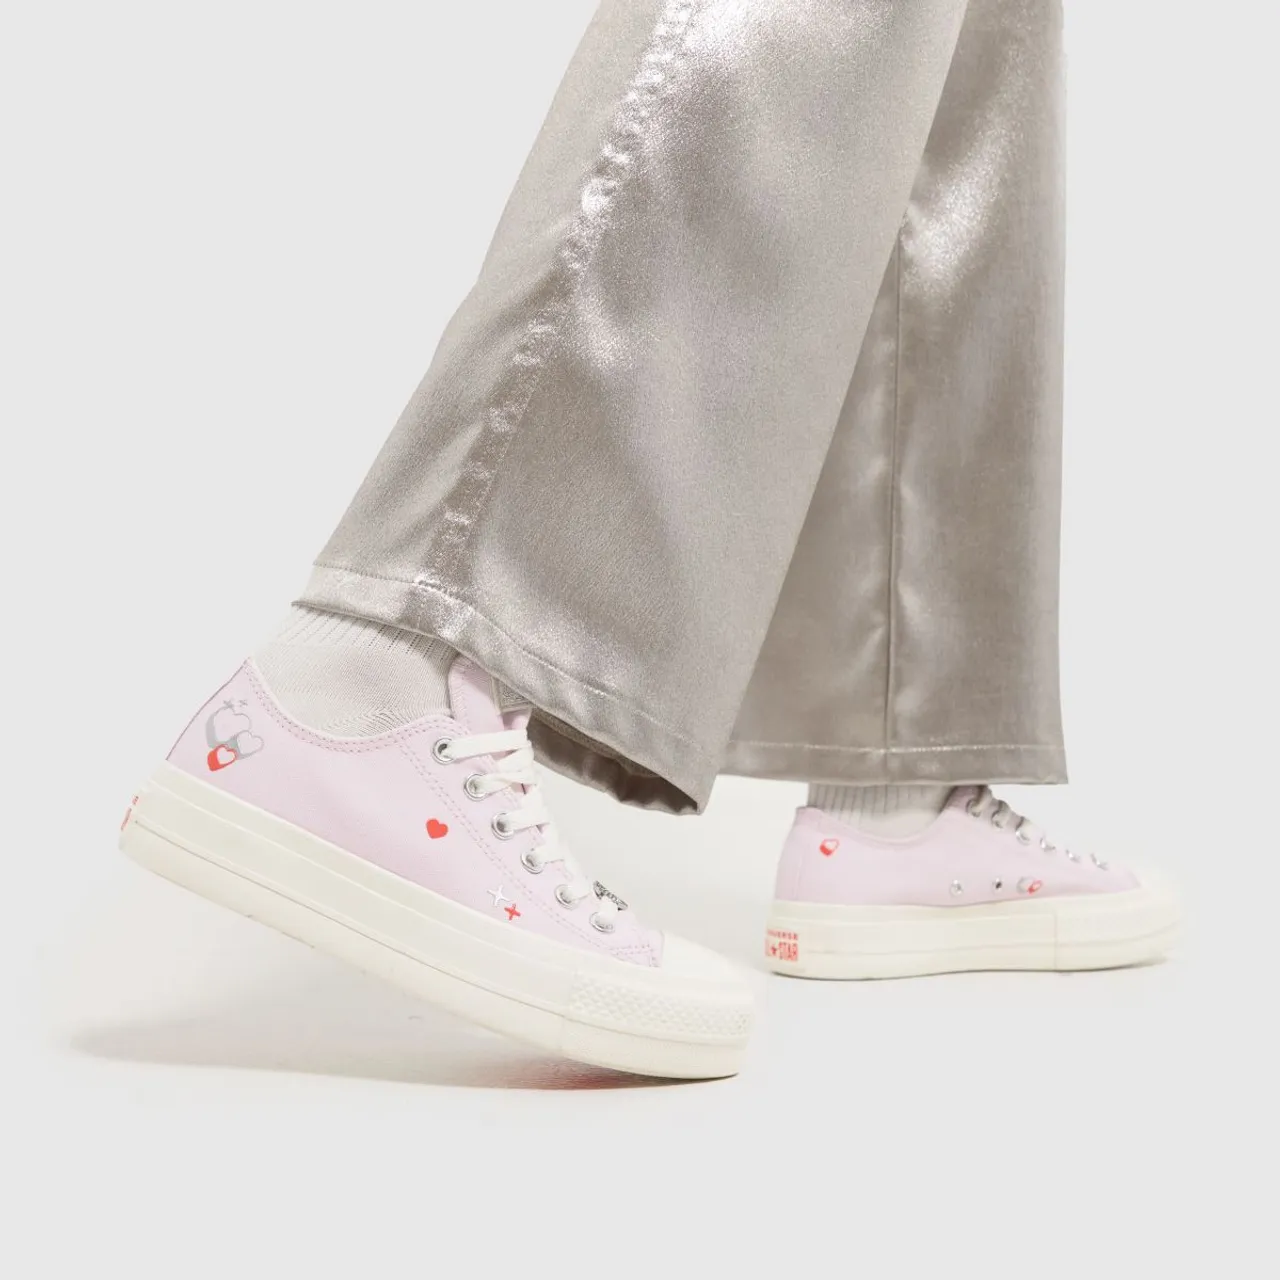 Converse all Star Lift ox y2k Heart Trainers in Lilac